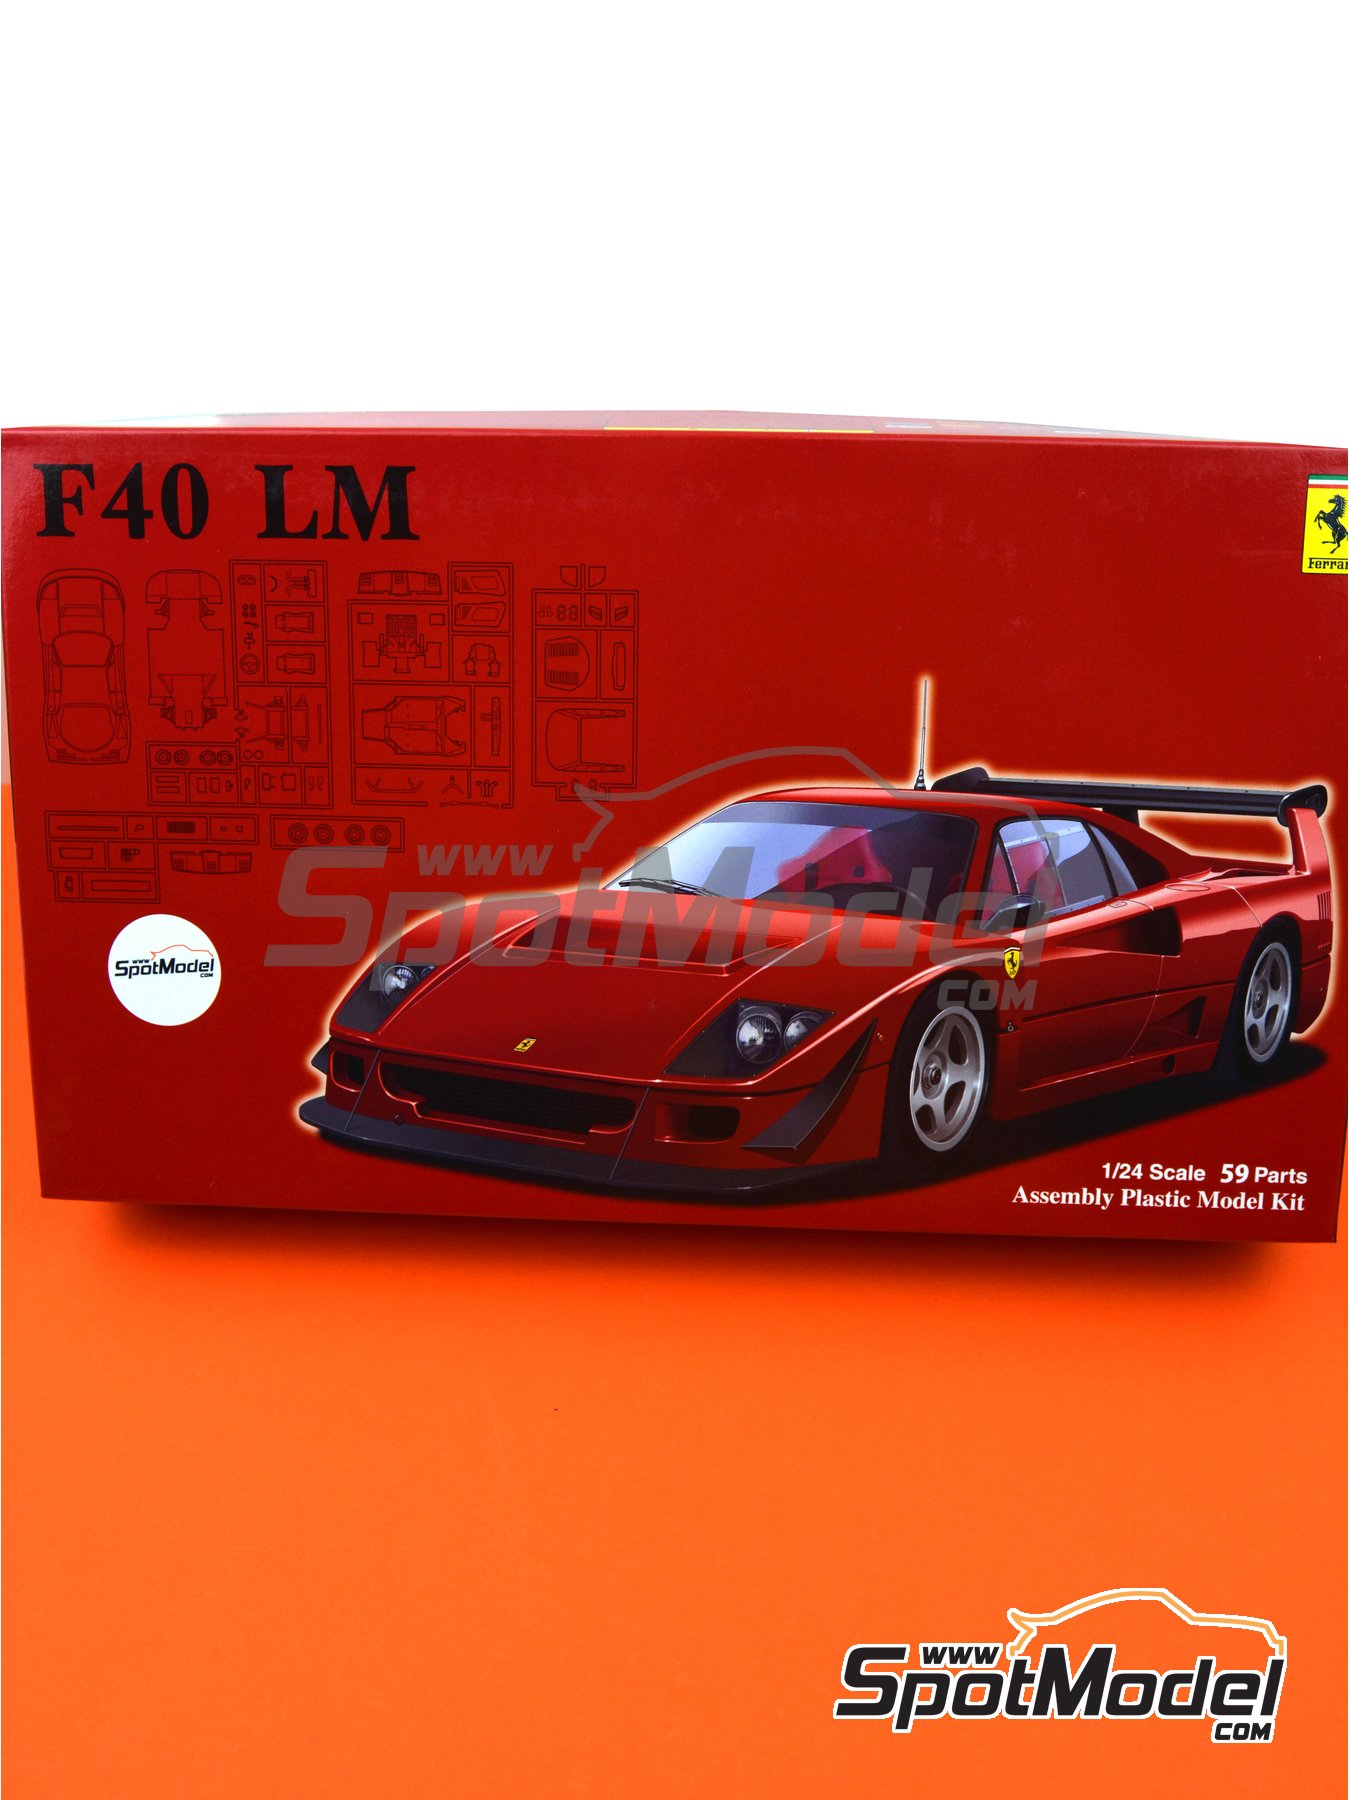 Ferrari F40 Lemans Model Car Kit In 1 24 Scale Manufactured By Fujimi Ref Fj126456 Also 4968728126456 126456 And Rs 114